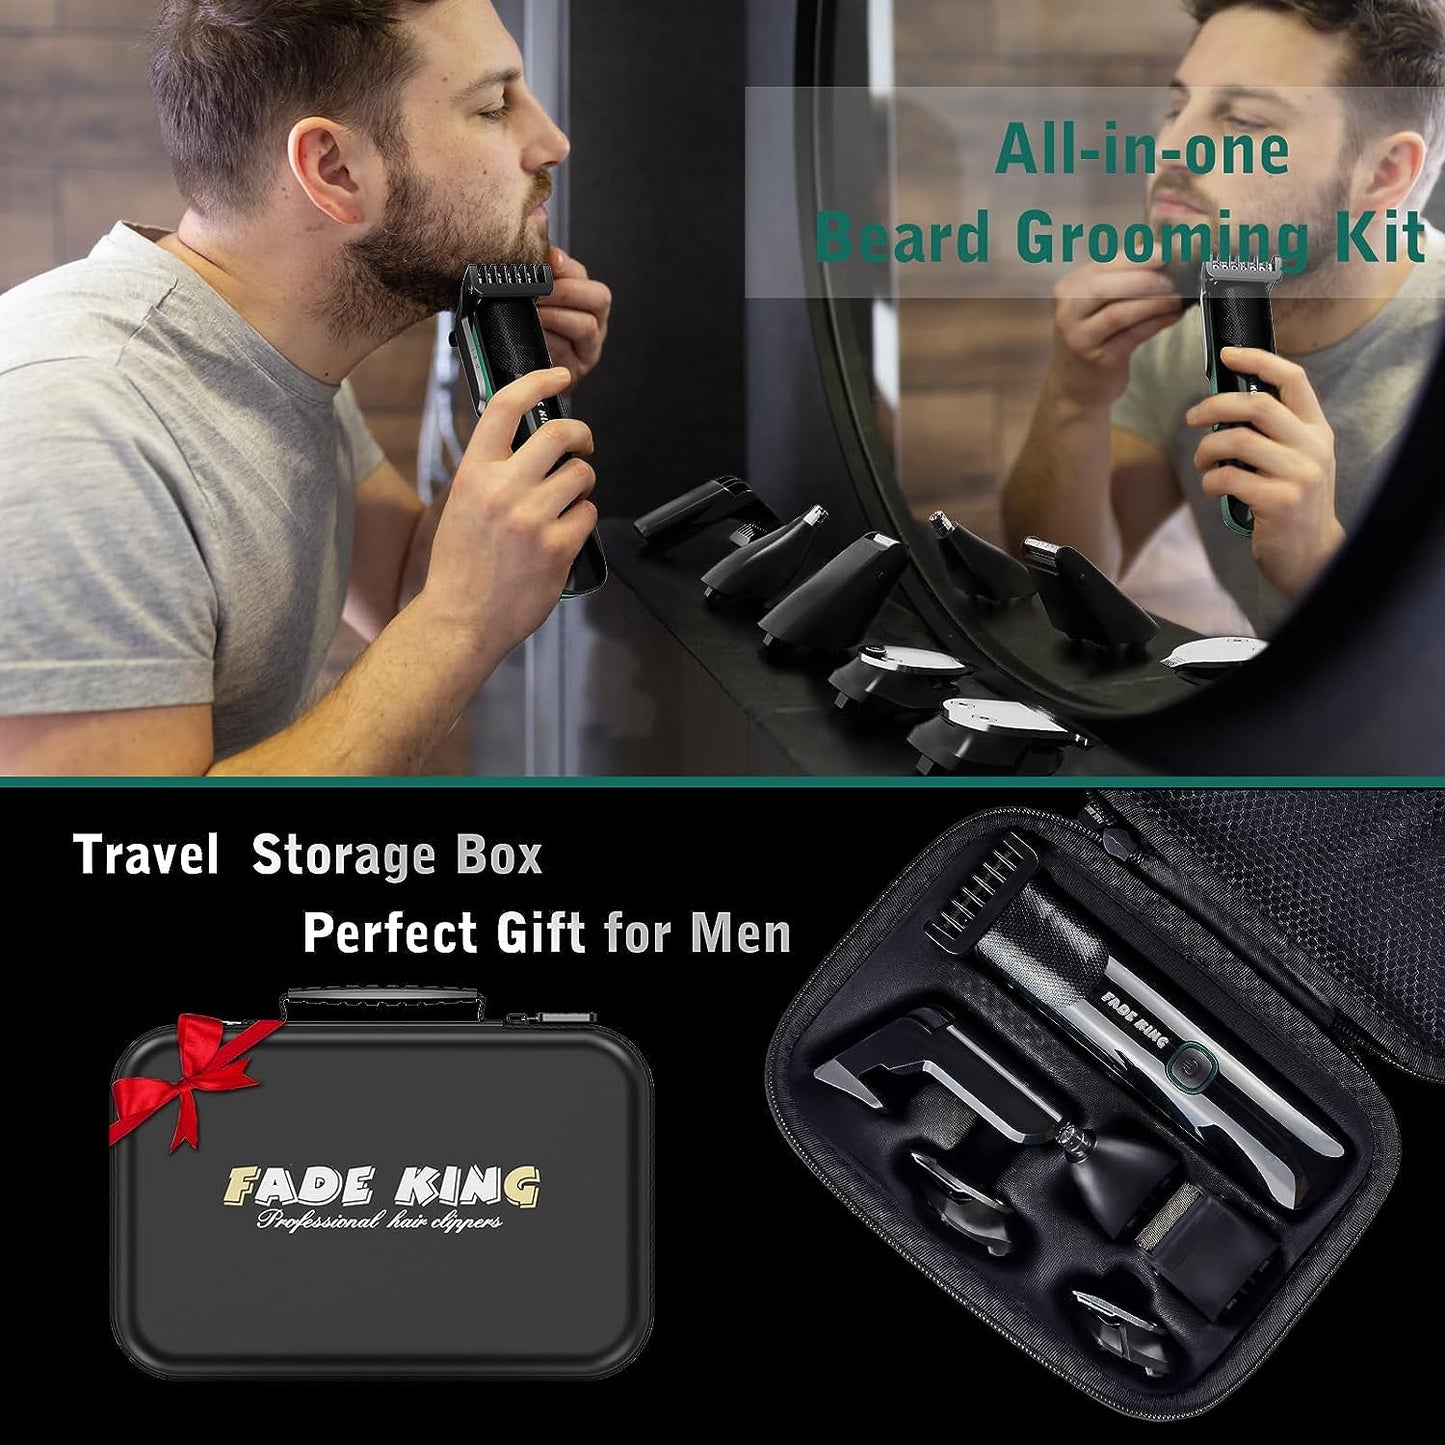 FadeKing All-in-One Beard Trimmer Set - Waterproof Men's Grooming Kit with 20 Length Settings, Adjustable Blade Wheel, and Travel Case for Perfect Beard, Face, Nose, and Ear Trimming - Ideal Gift for Him